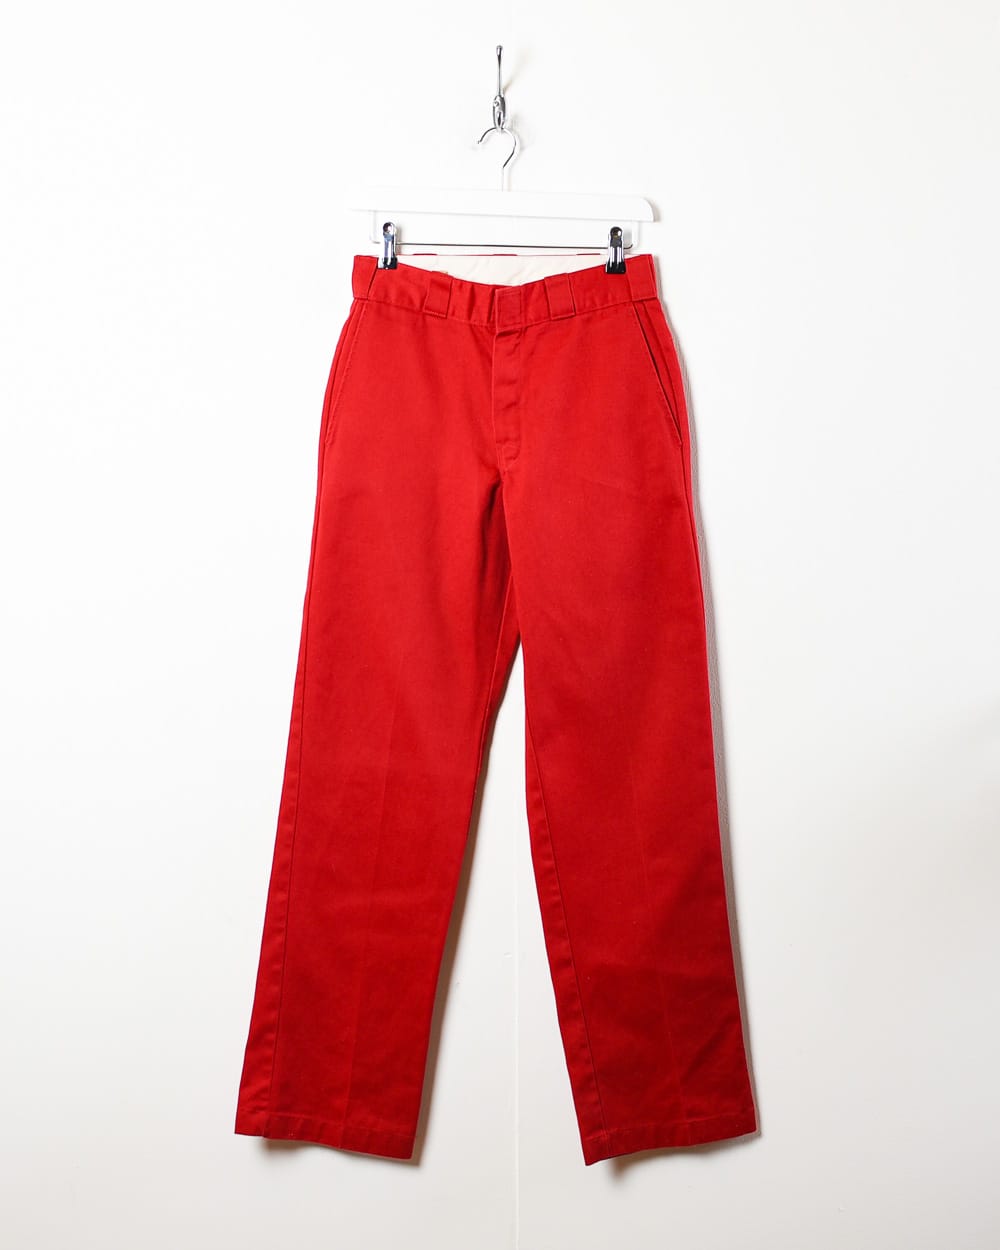 Red Dickies Trousers - W28 L31